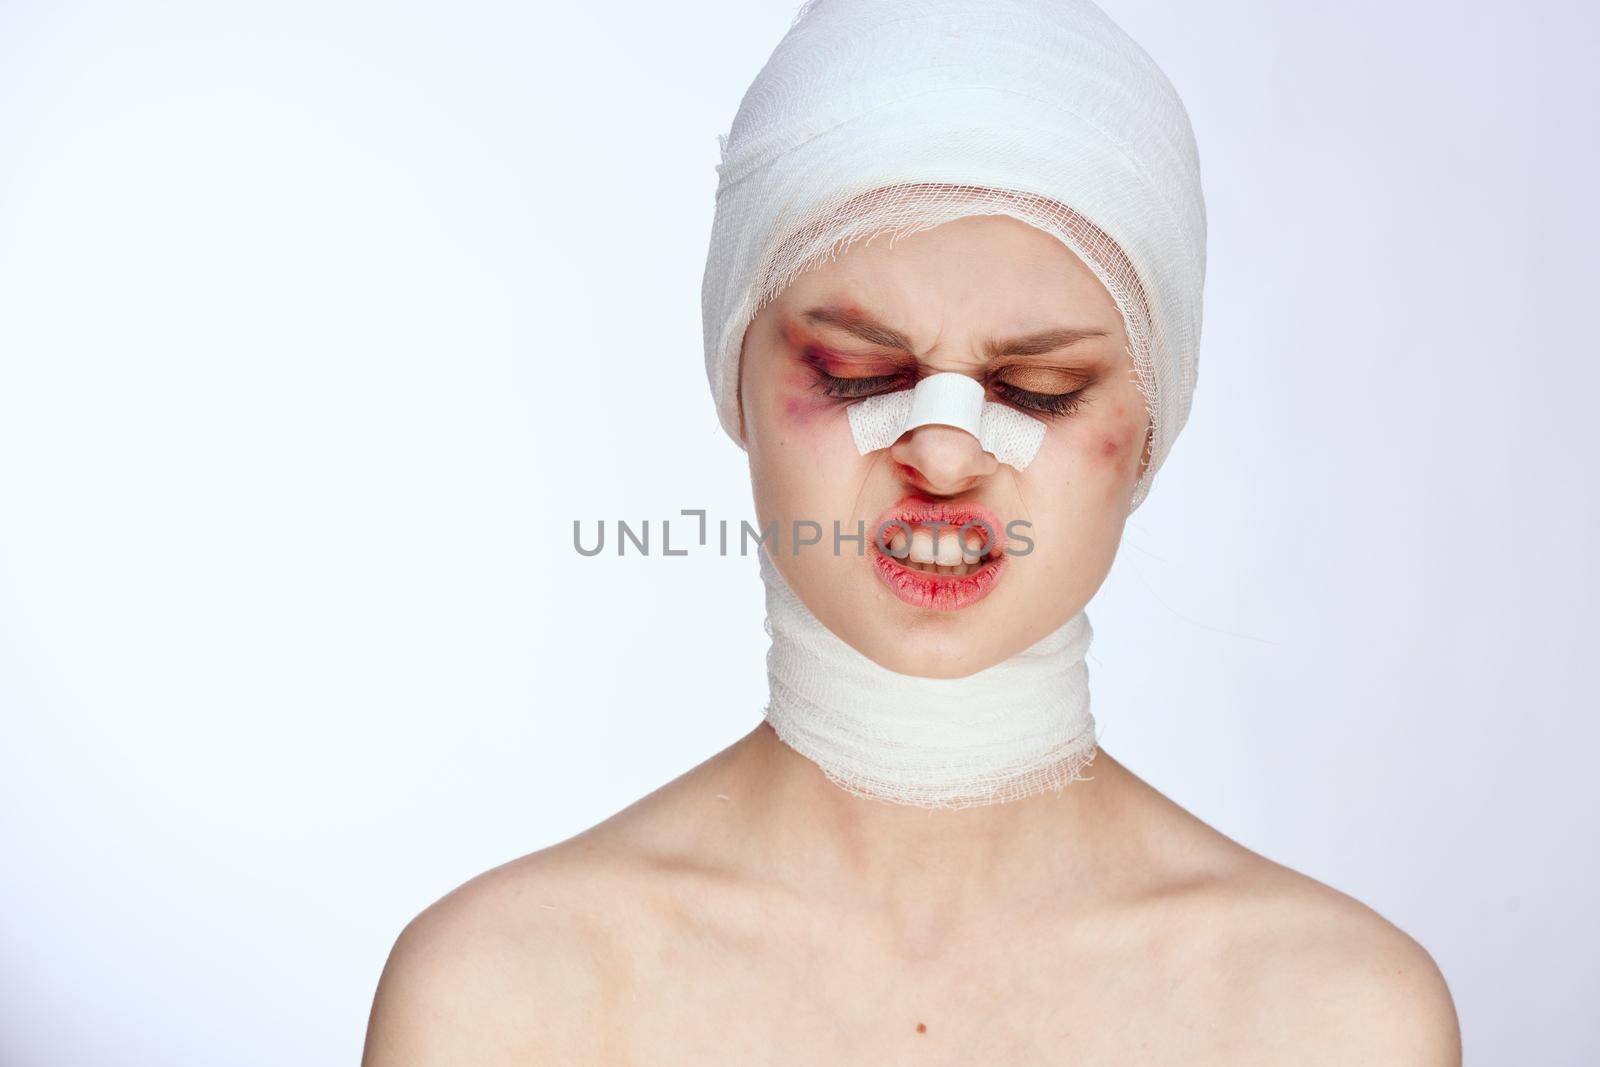 woman plastic surgery operation bare shoulders light background. High quality photo